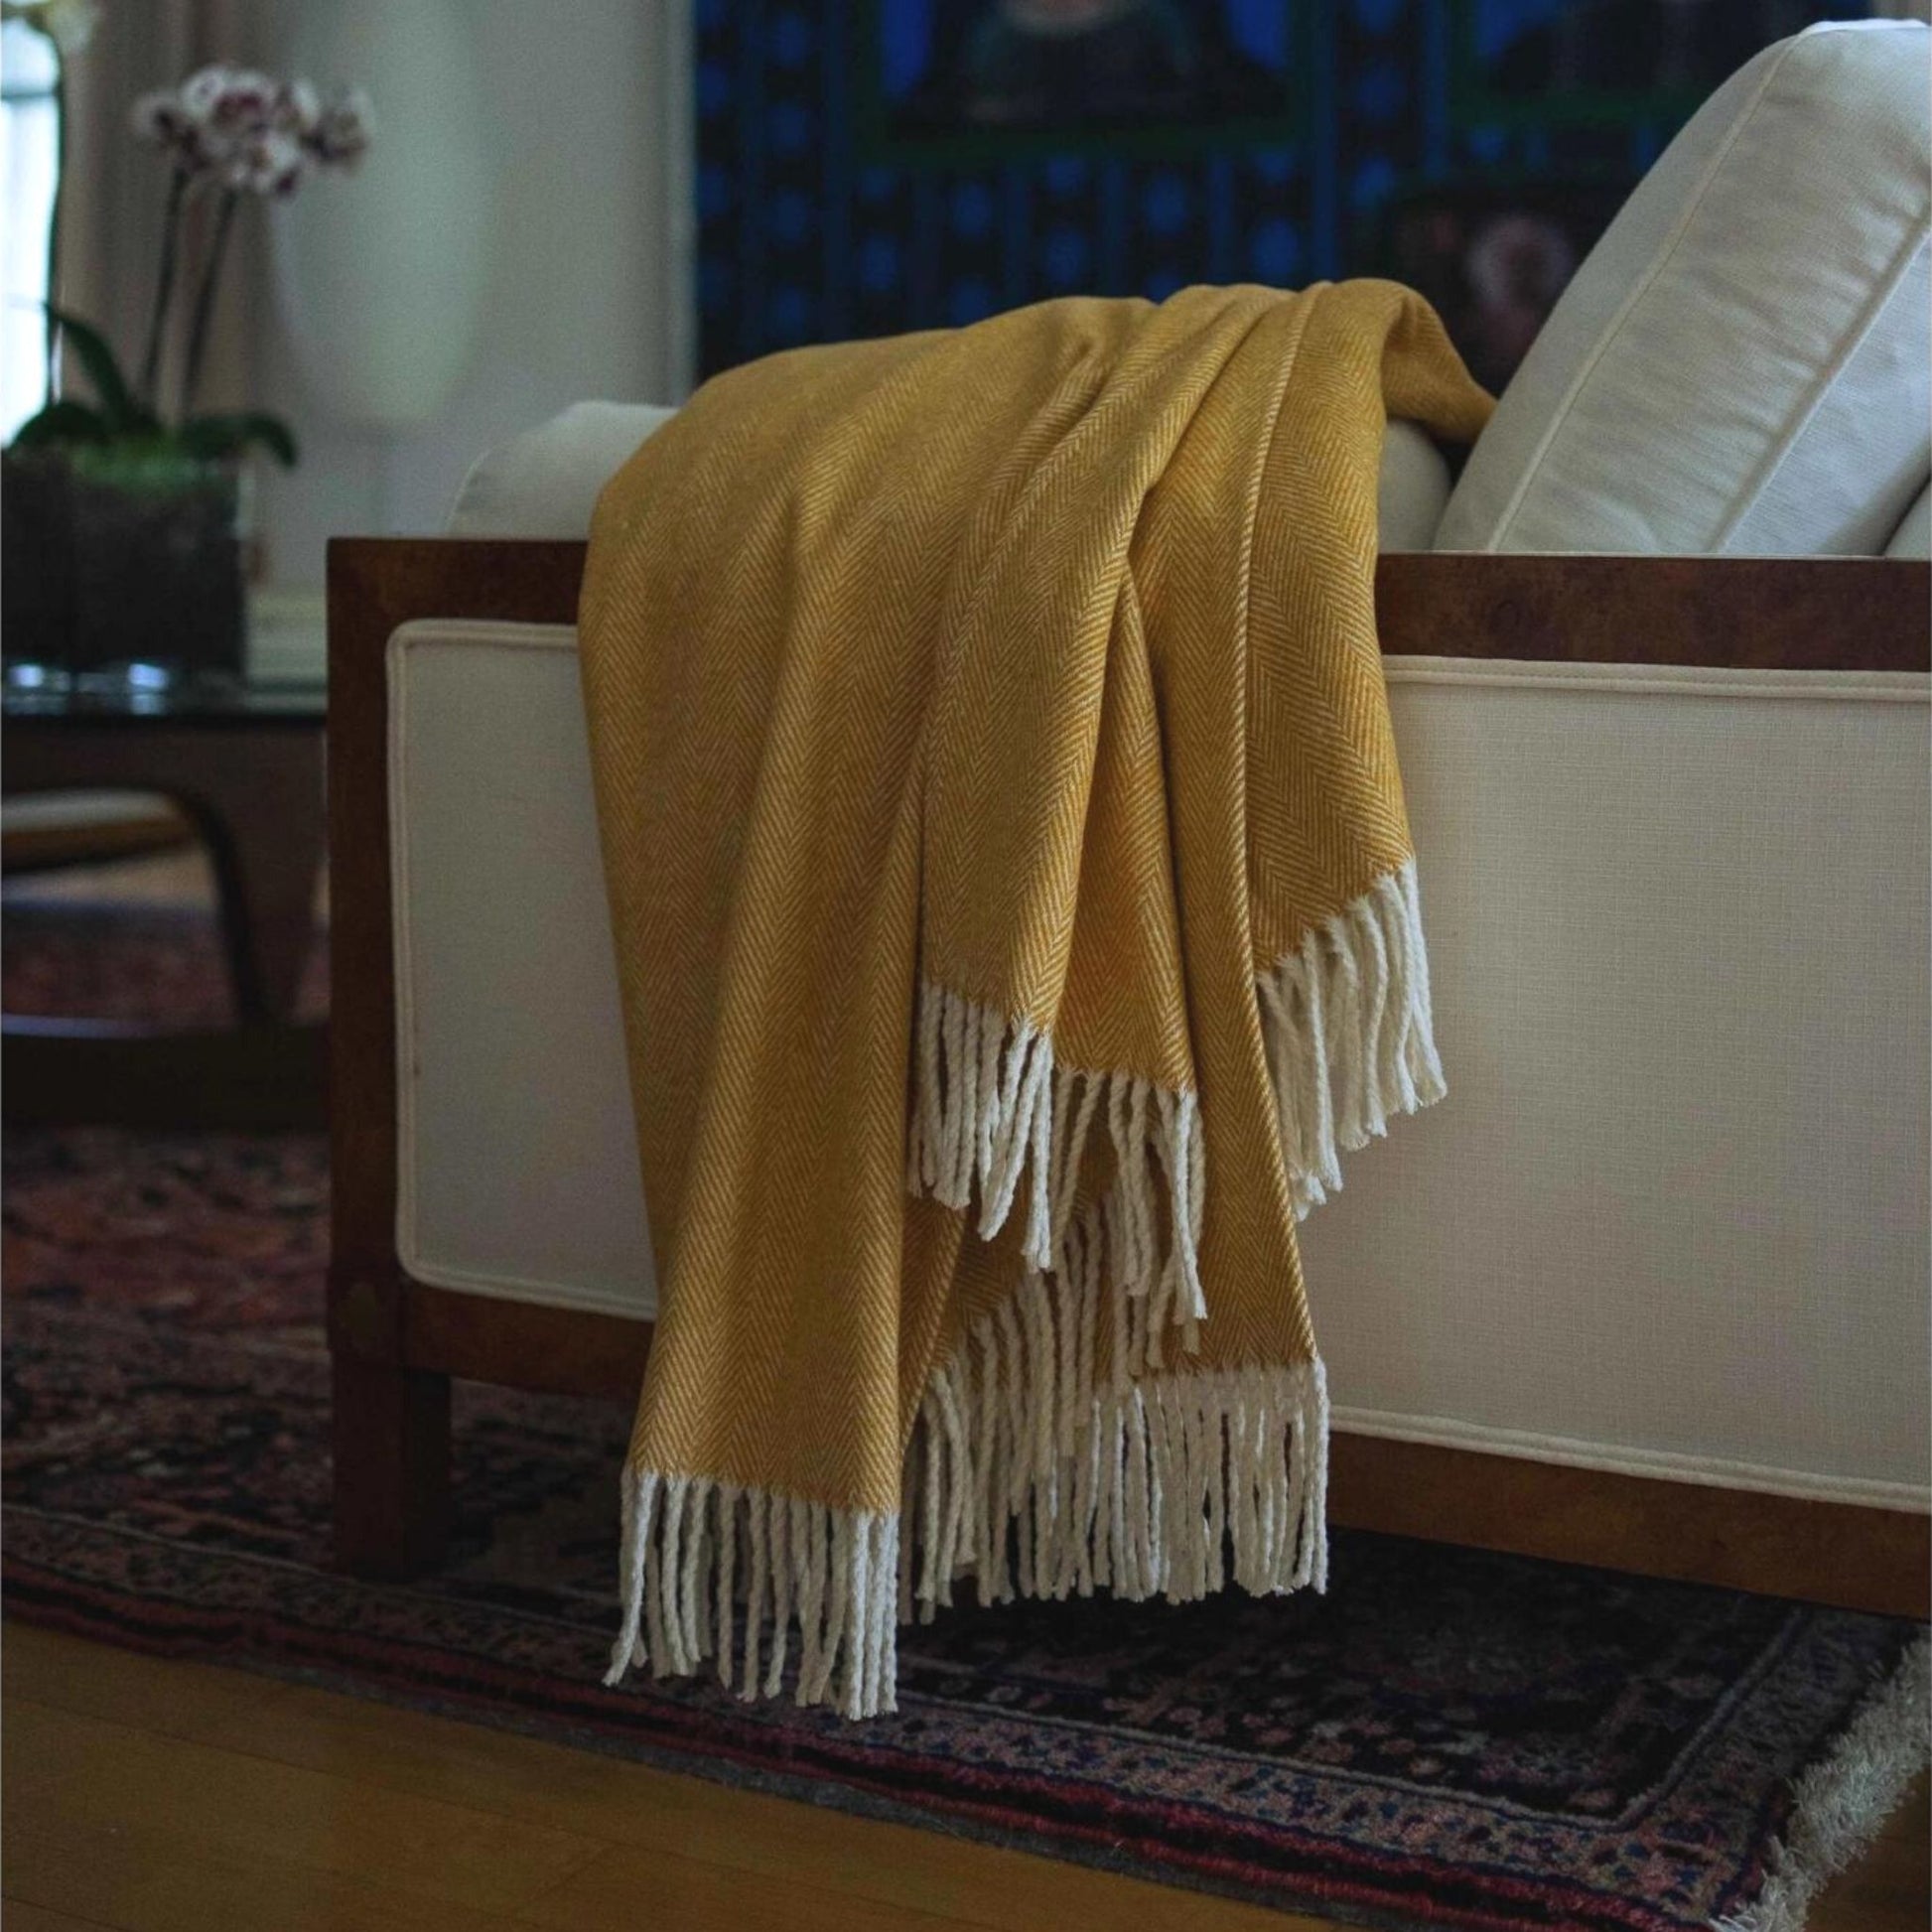 Yellow and white brushed cotton Blanket with herringbone pattern which feels as soft as cashmere